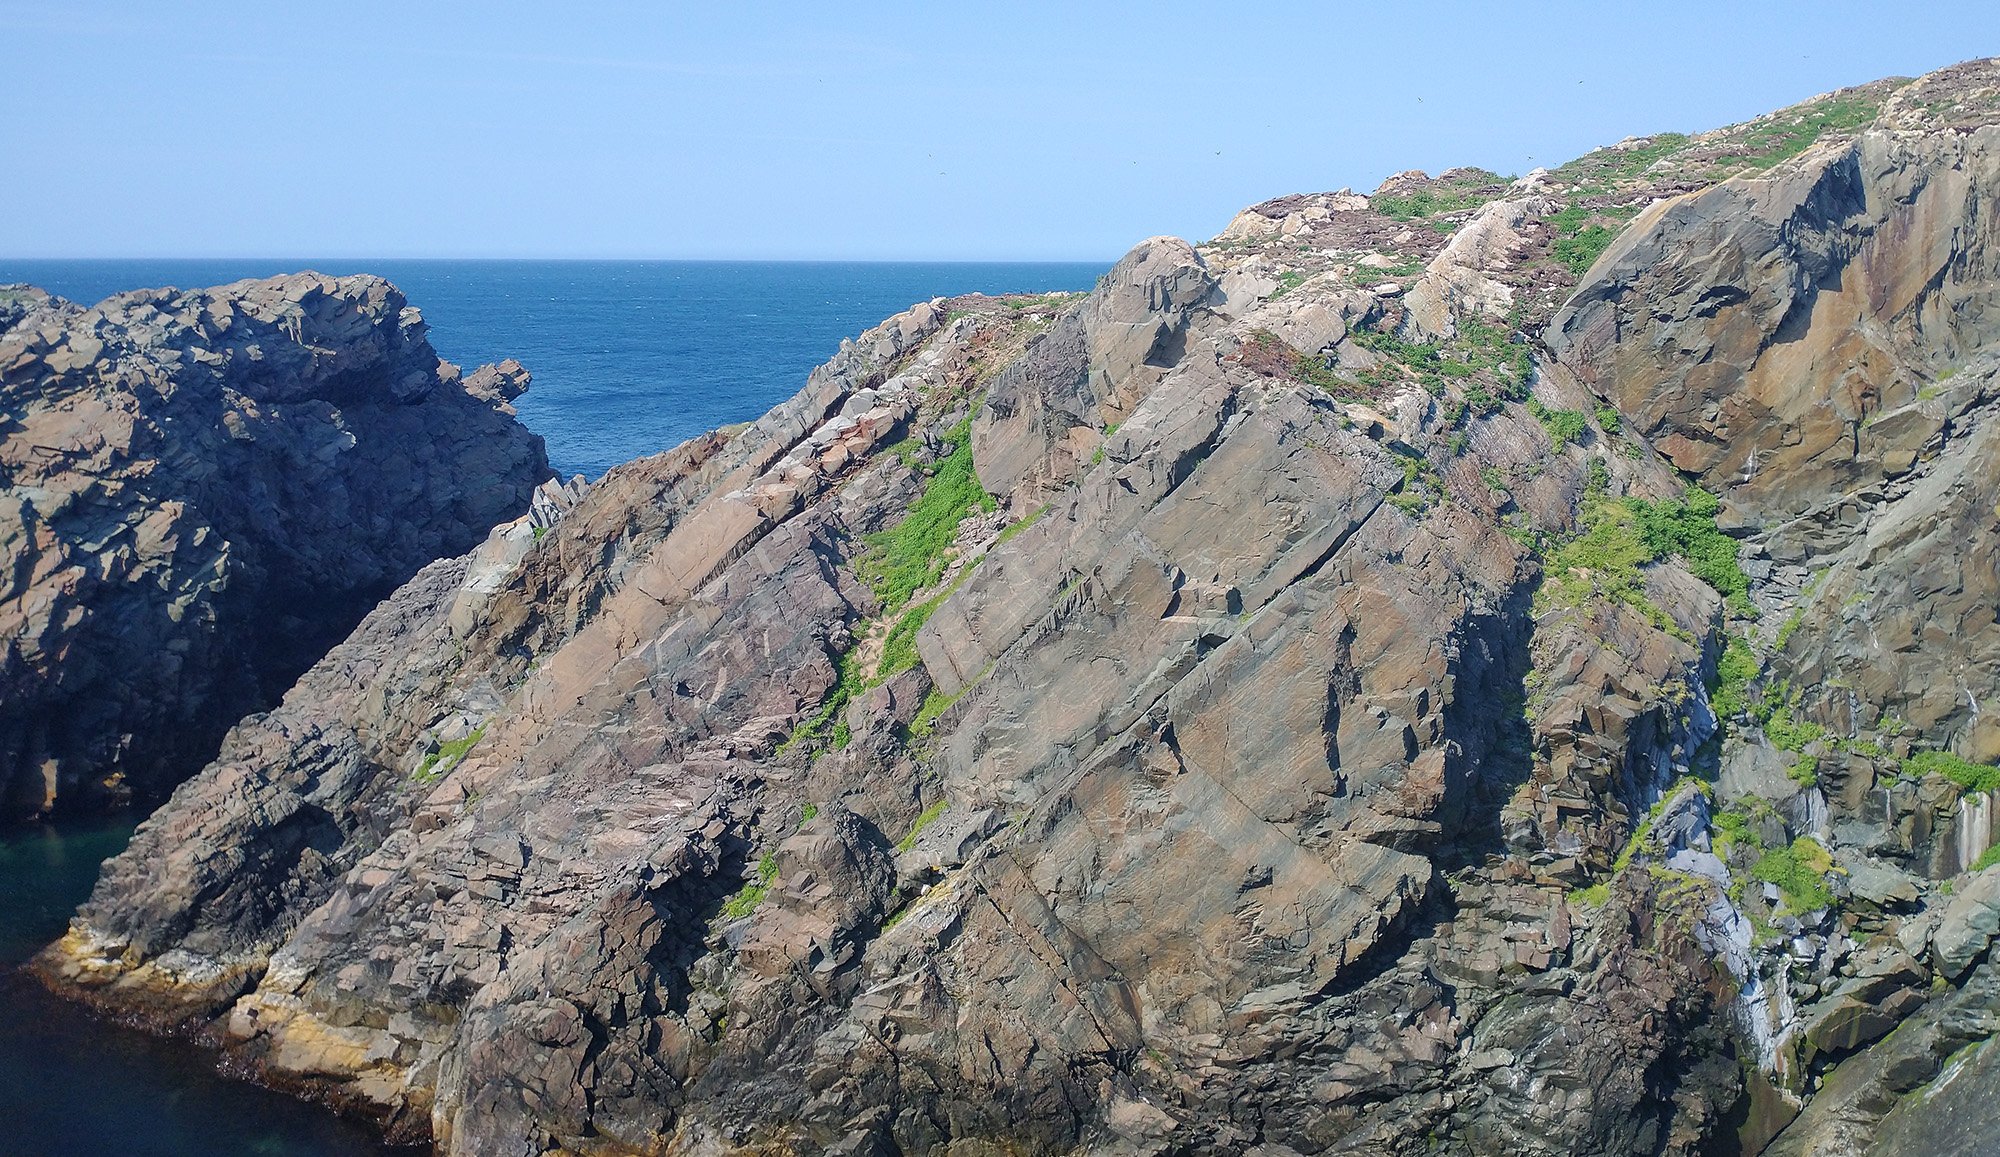 Behind the lighthouse there's this huge rock that hosts a puffin colony!